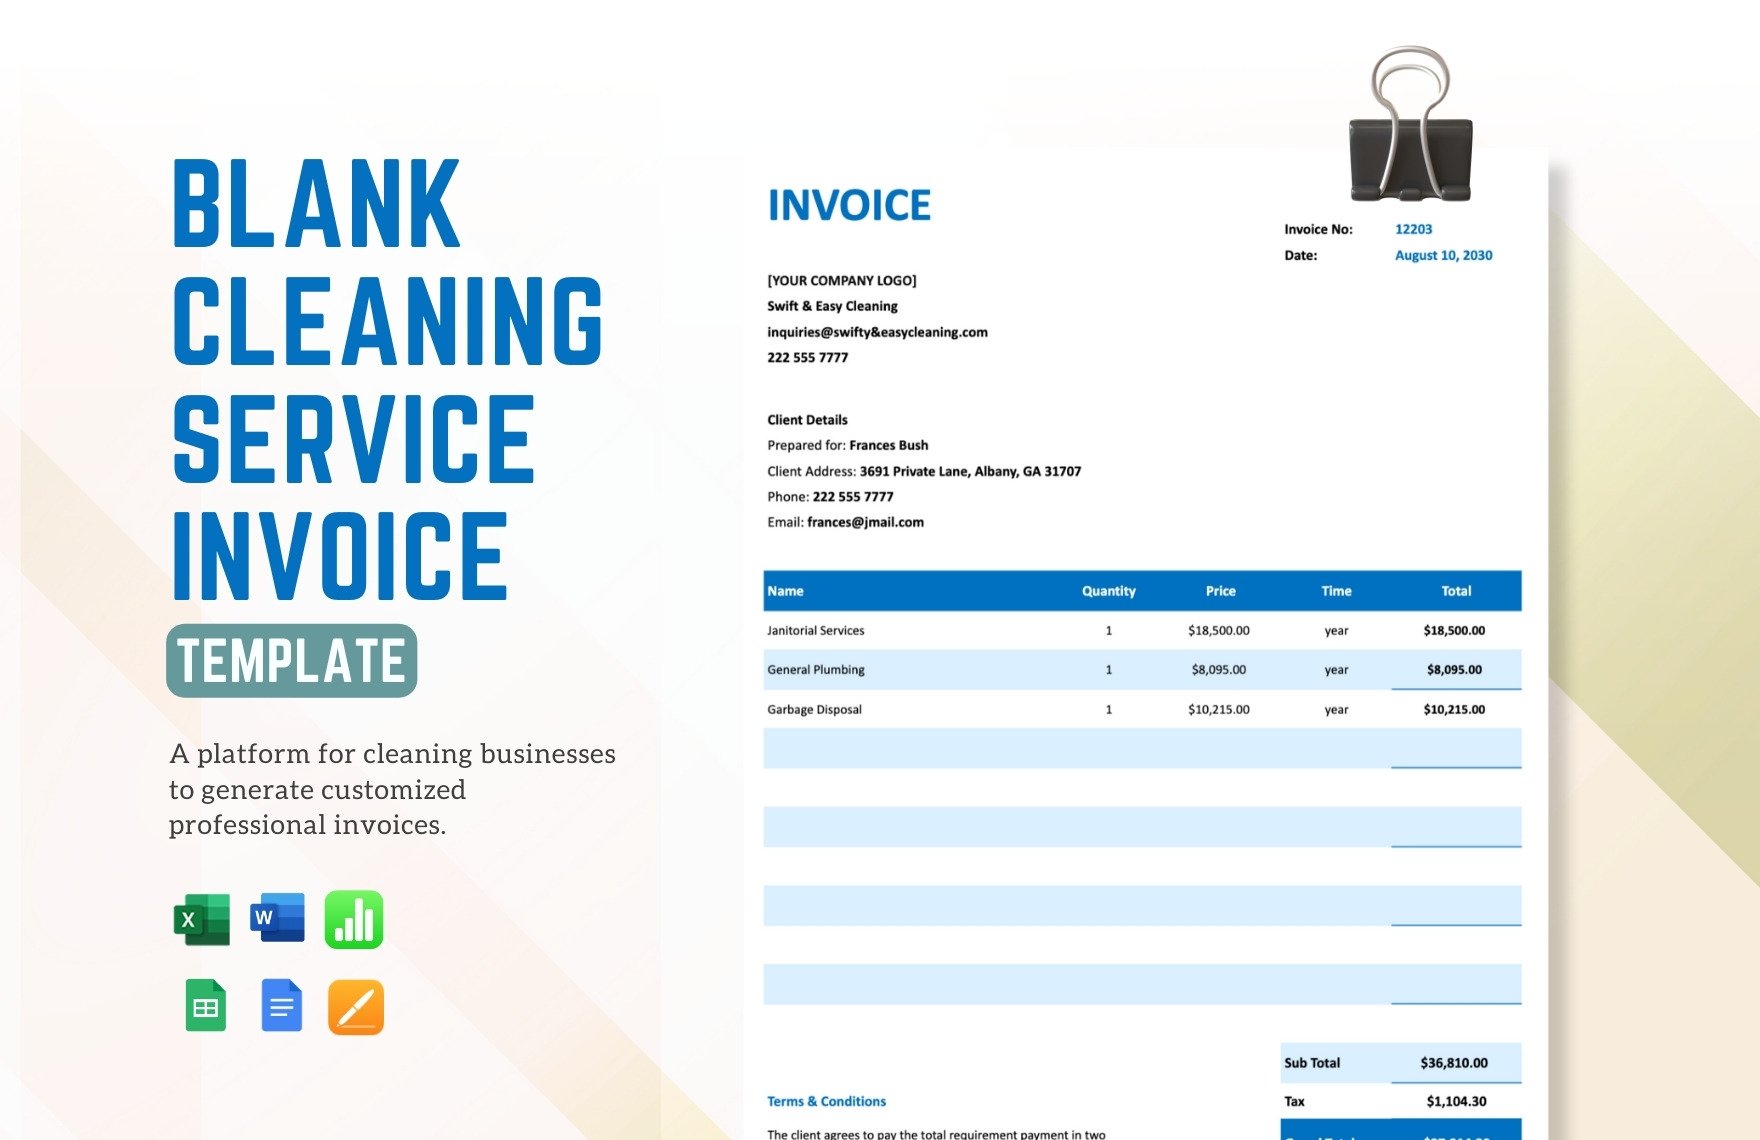 Free Blank Cleaning Service Invoice Template in Word, Google Docs, Excel, Google Sheets, Apple Pages, Apple Numbers